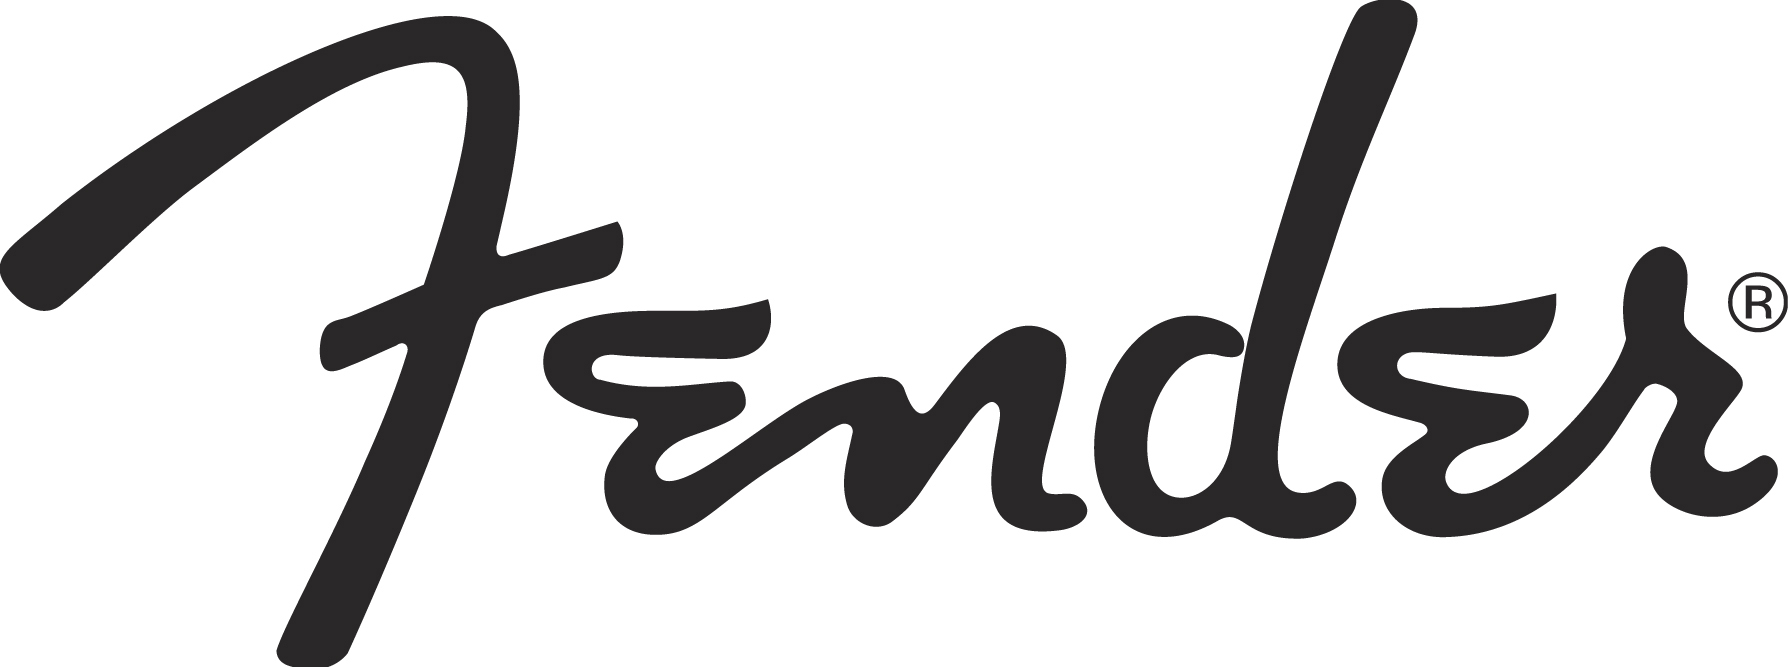 Demystifying Guitar Education: Fender Play Inspires Next Generation Players to Learn Guitar- Logo